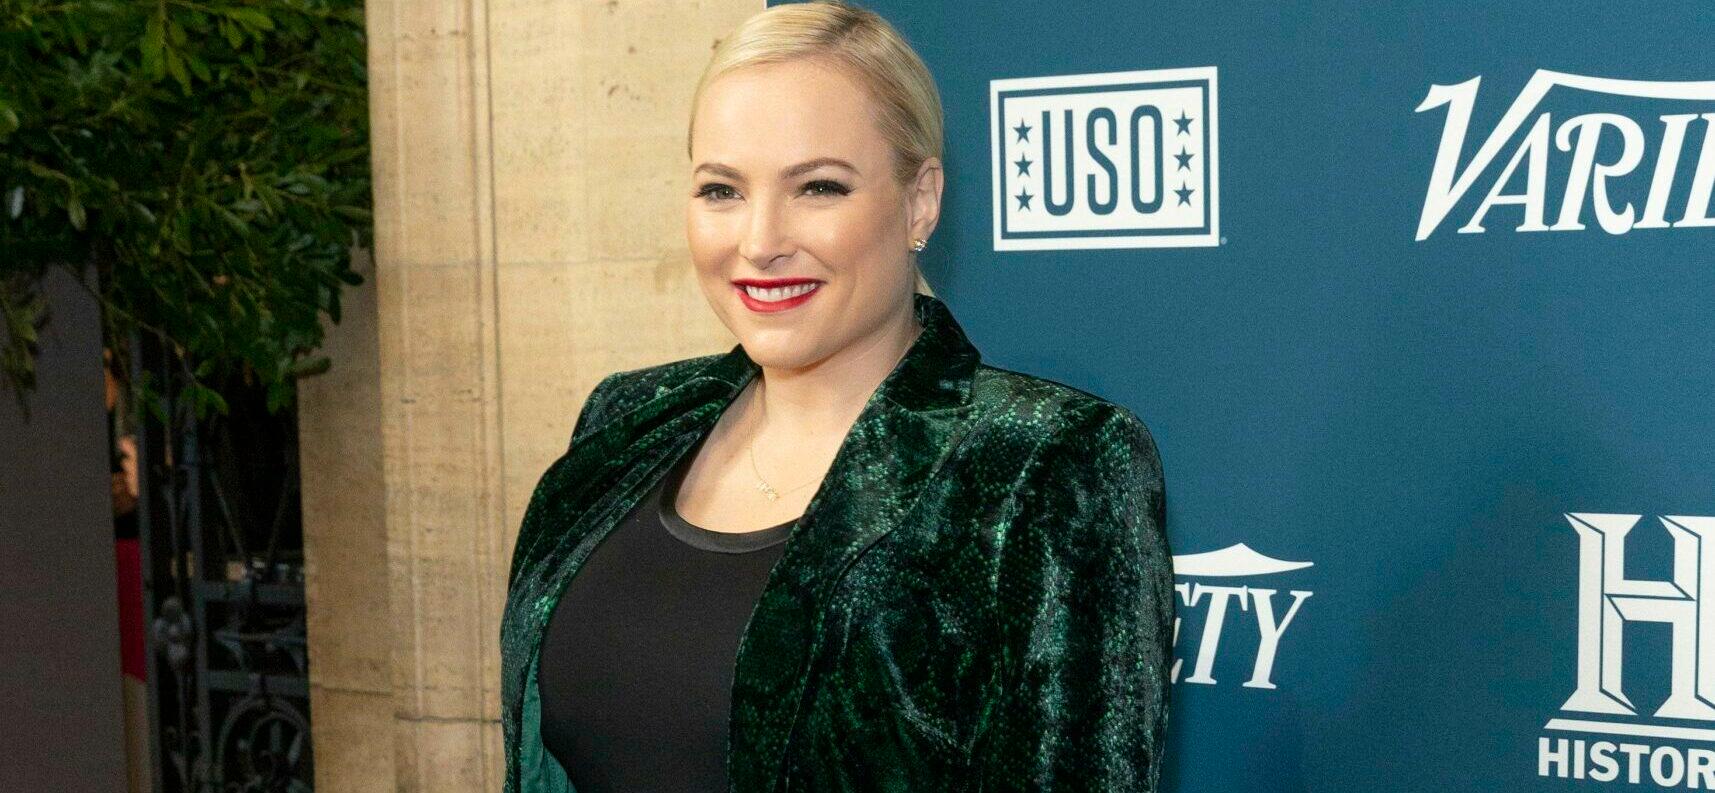 Viewers React To Meghan McCain’s Claims & Departure From 'The View'